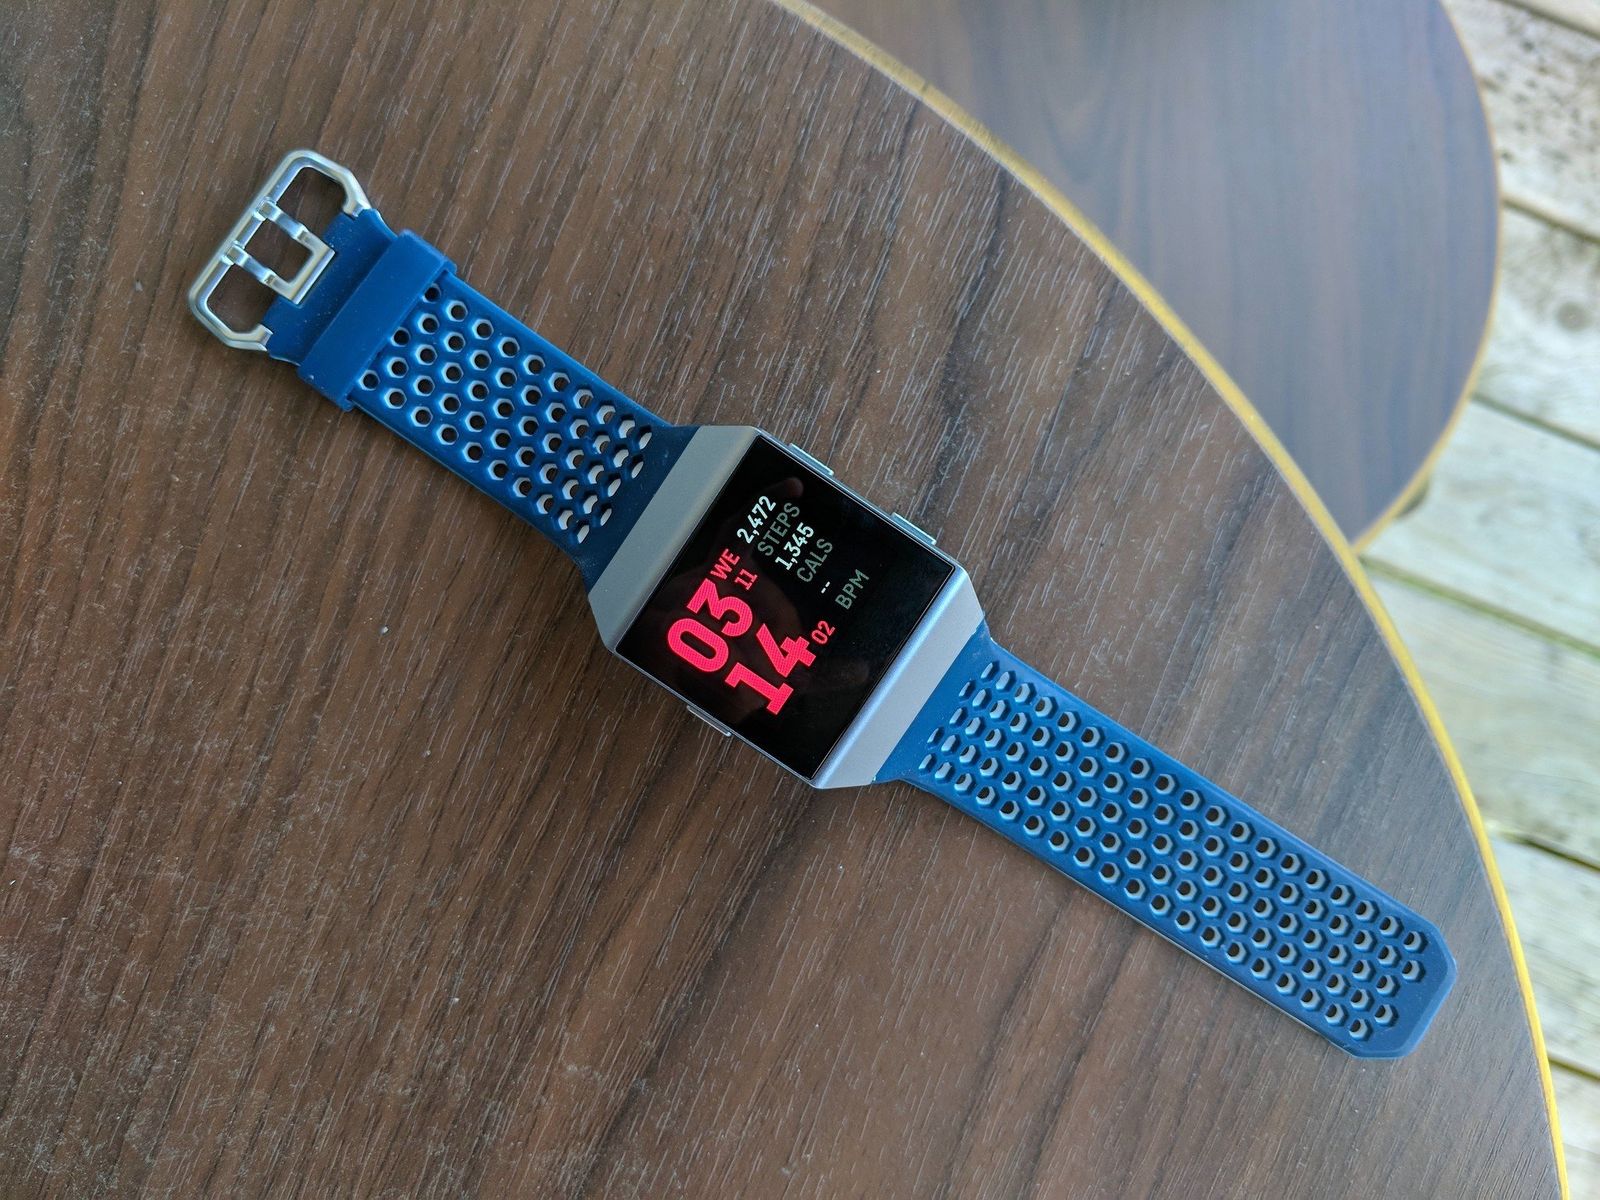 fitbit devices with gps